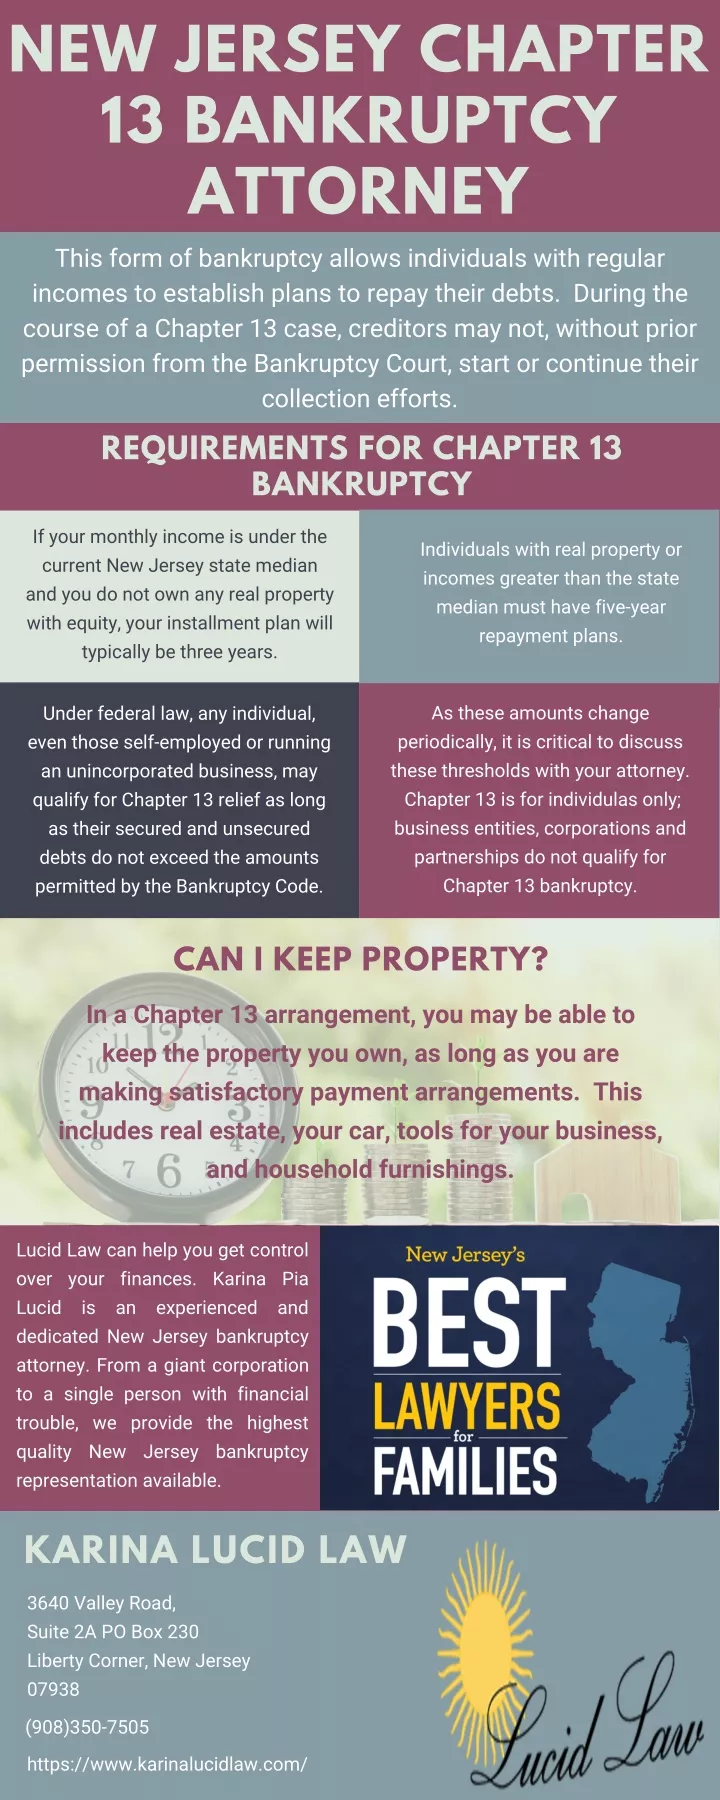 new jersey chapter 13 bankruptcy attorney